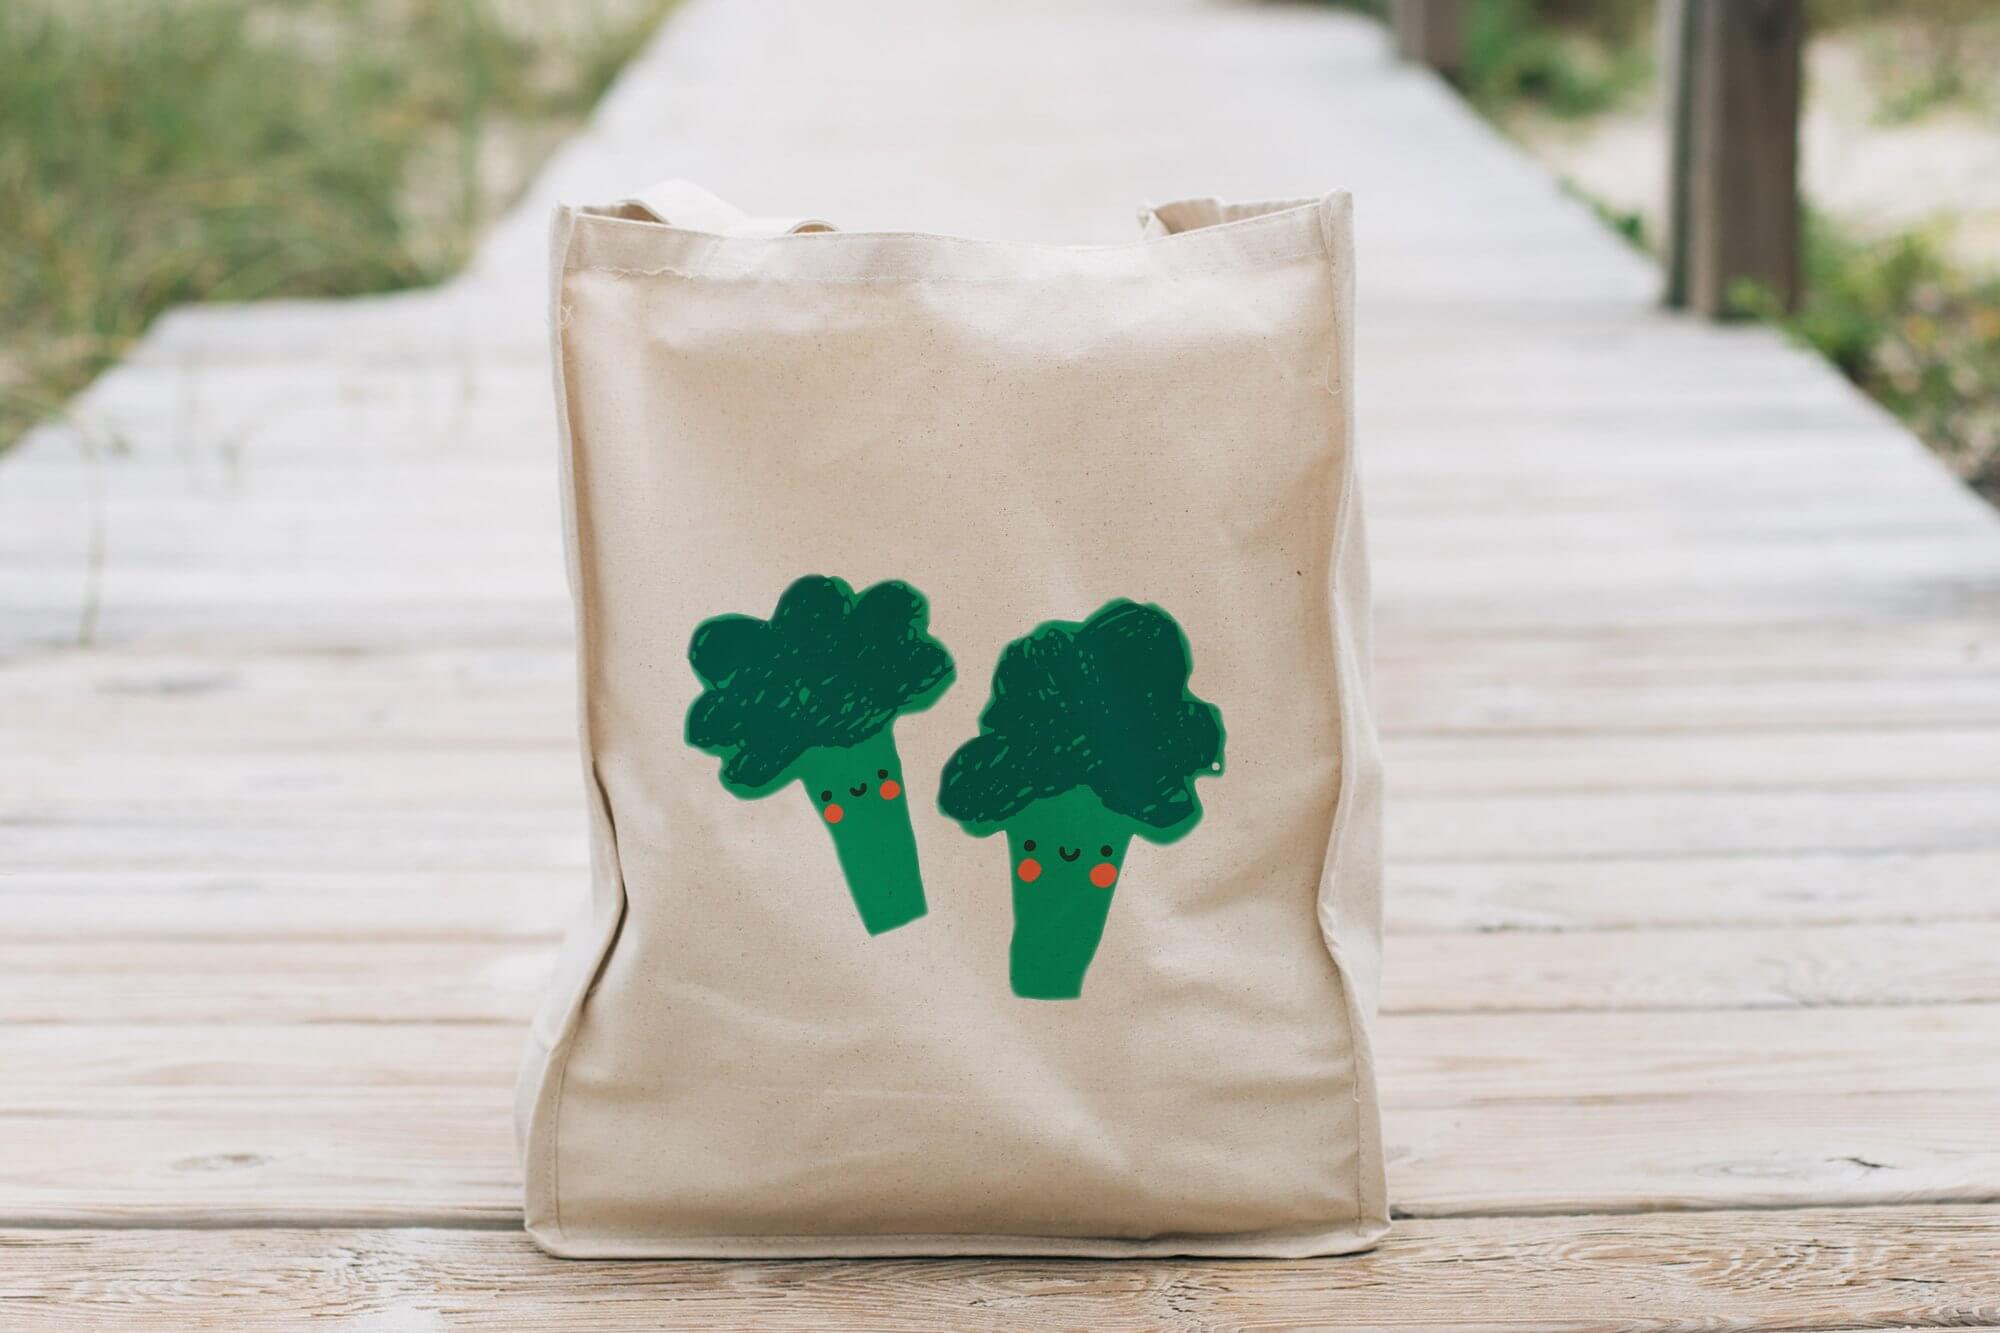 Two green broccoli are drawn on the paper bag.